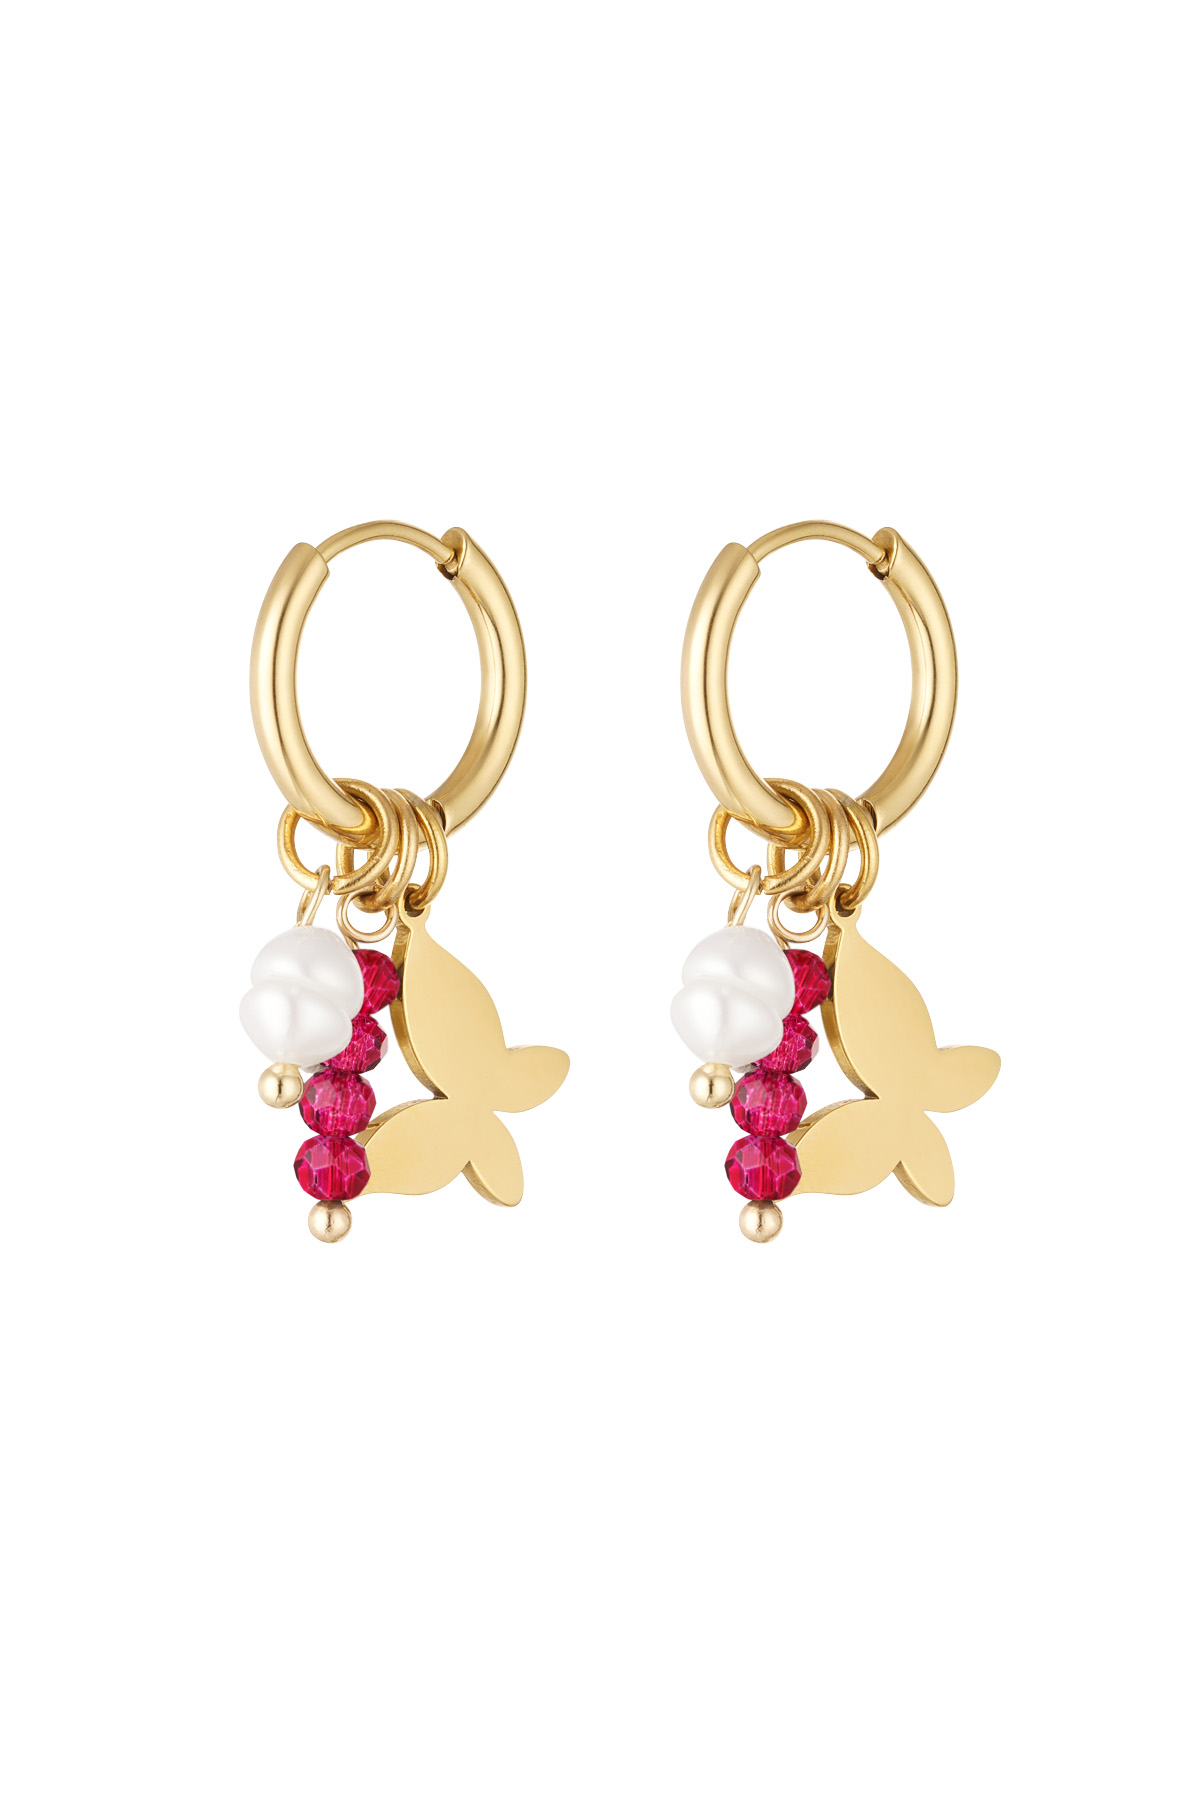 Butterfly earrings with beads - gold/pink h5 